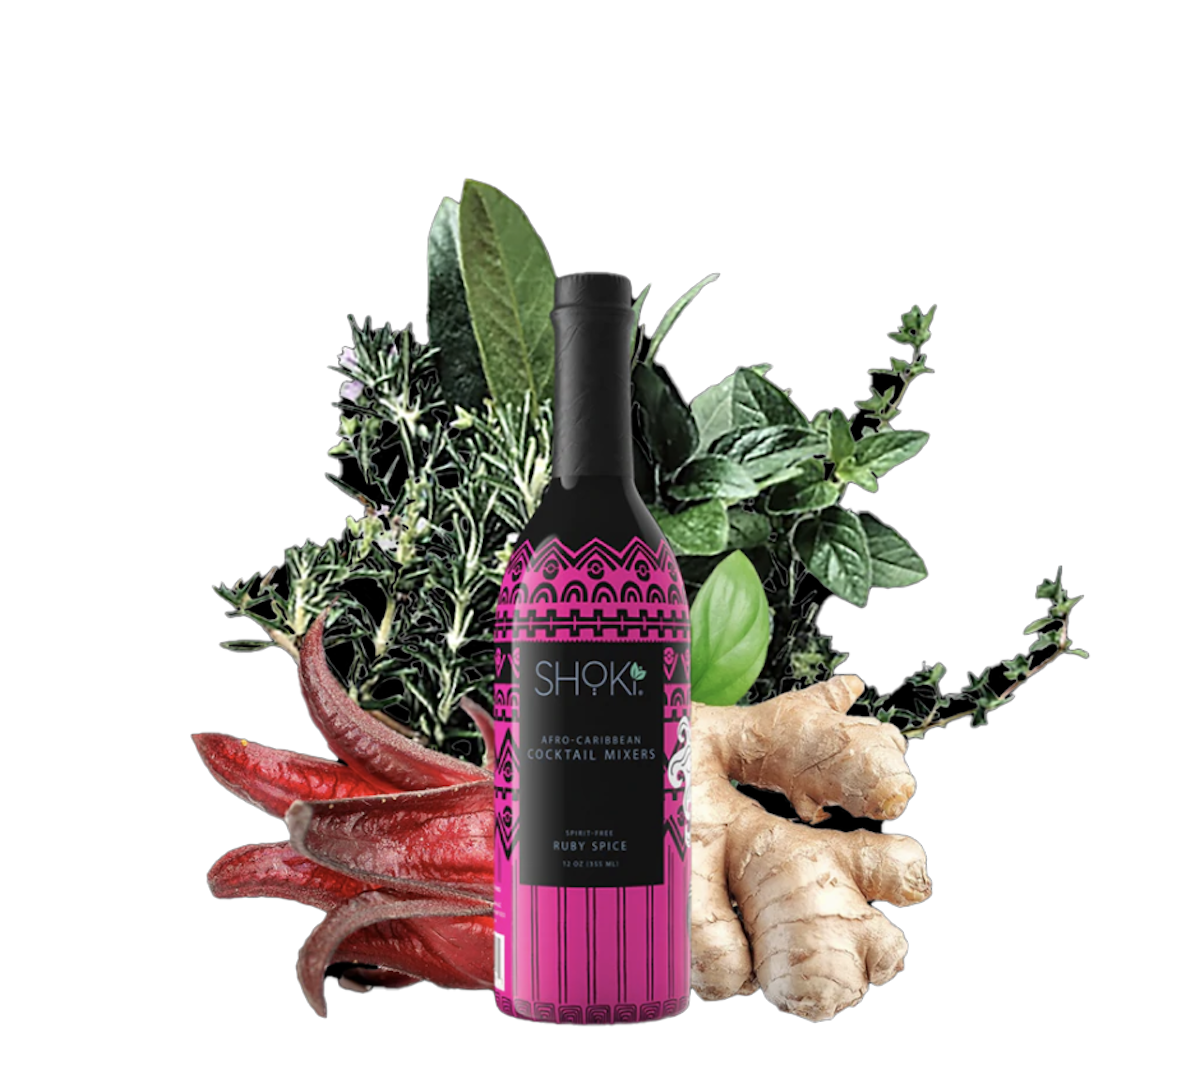 pink Shoki ruby spice bottle surrounded by ginger peppers cannabis buds and other leafy herbs